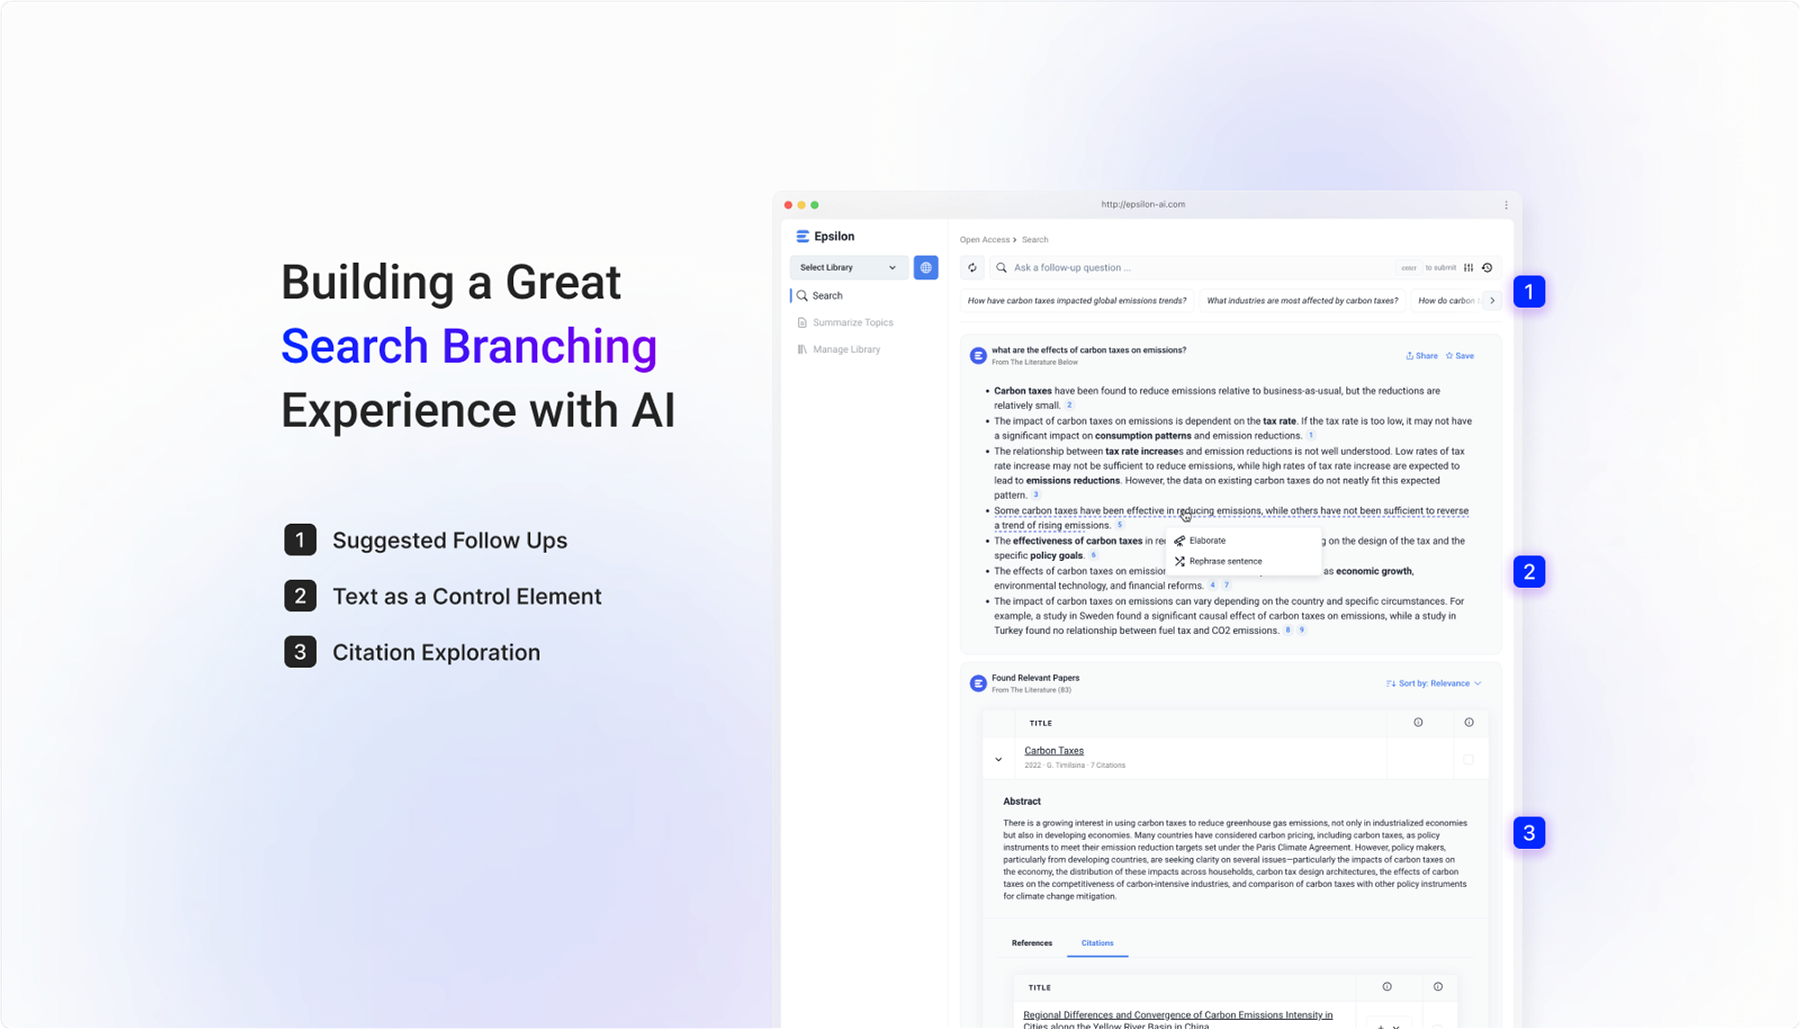 Building a Great Search Branching Experience with AI